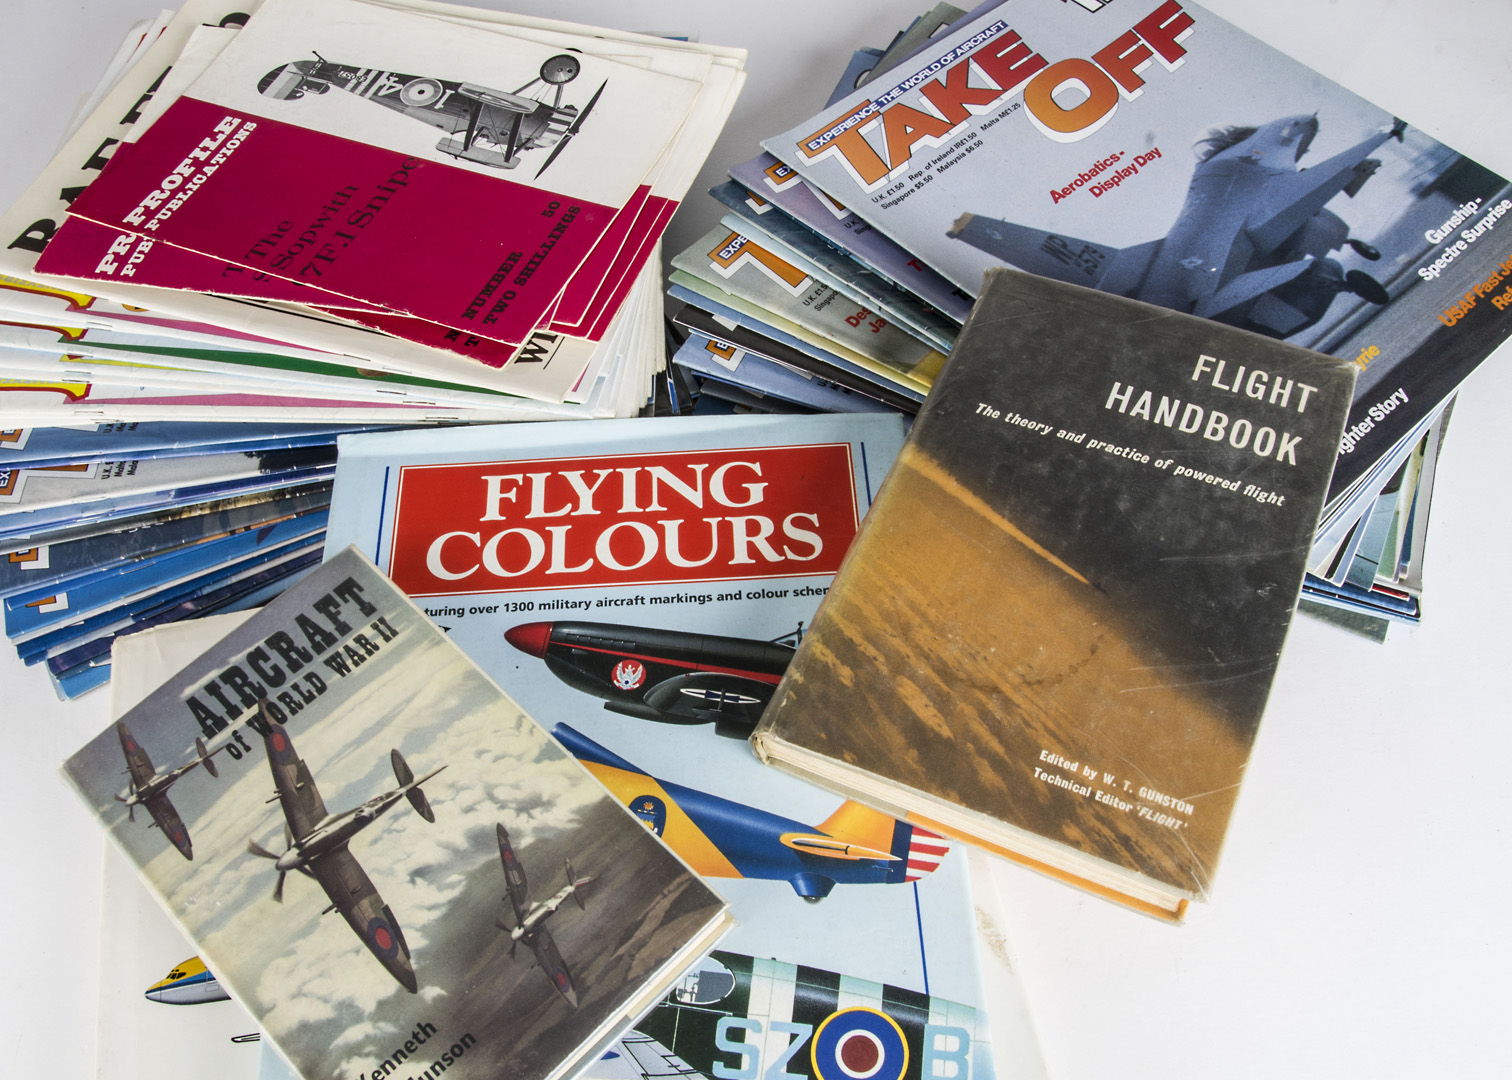 Aviation, a collection of approx 130 "Take Off" magazines together with "Twenty First Profile"